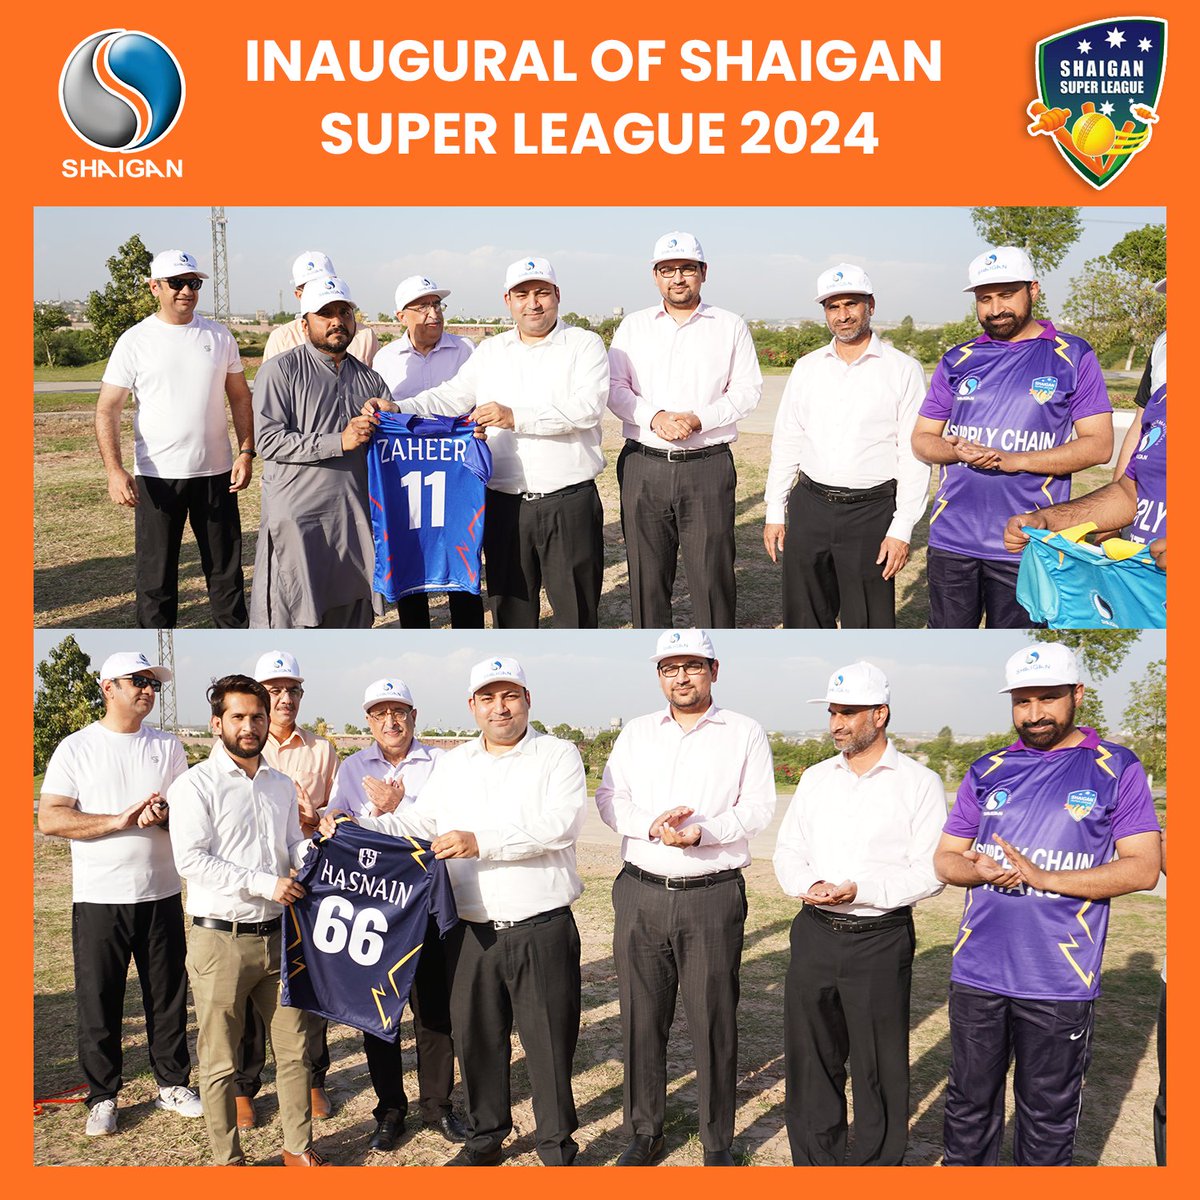 🏏 Shaigan Super League is back! 🏏 Calling all Shaigan employees to gear up for the ultimate cricket showdown! It's time to bat, bowl, and field your way to victory in the most anticipated tournament of the year. #ShaiganSuperLeague #CricketFever #EmployeeWellness'